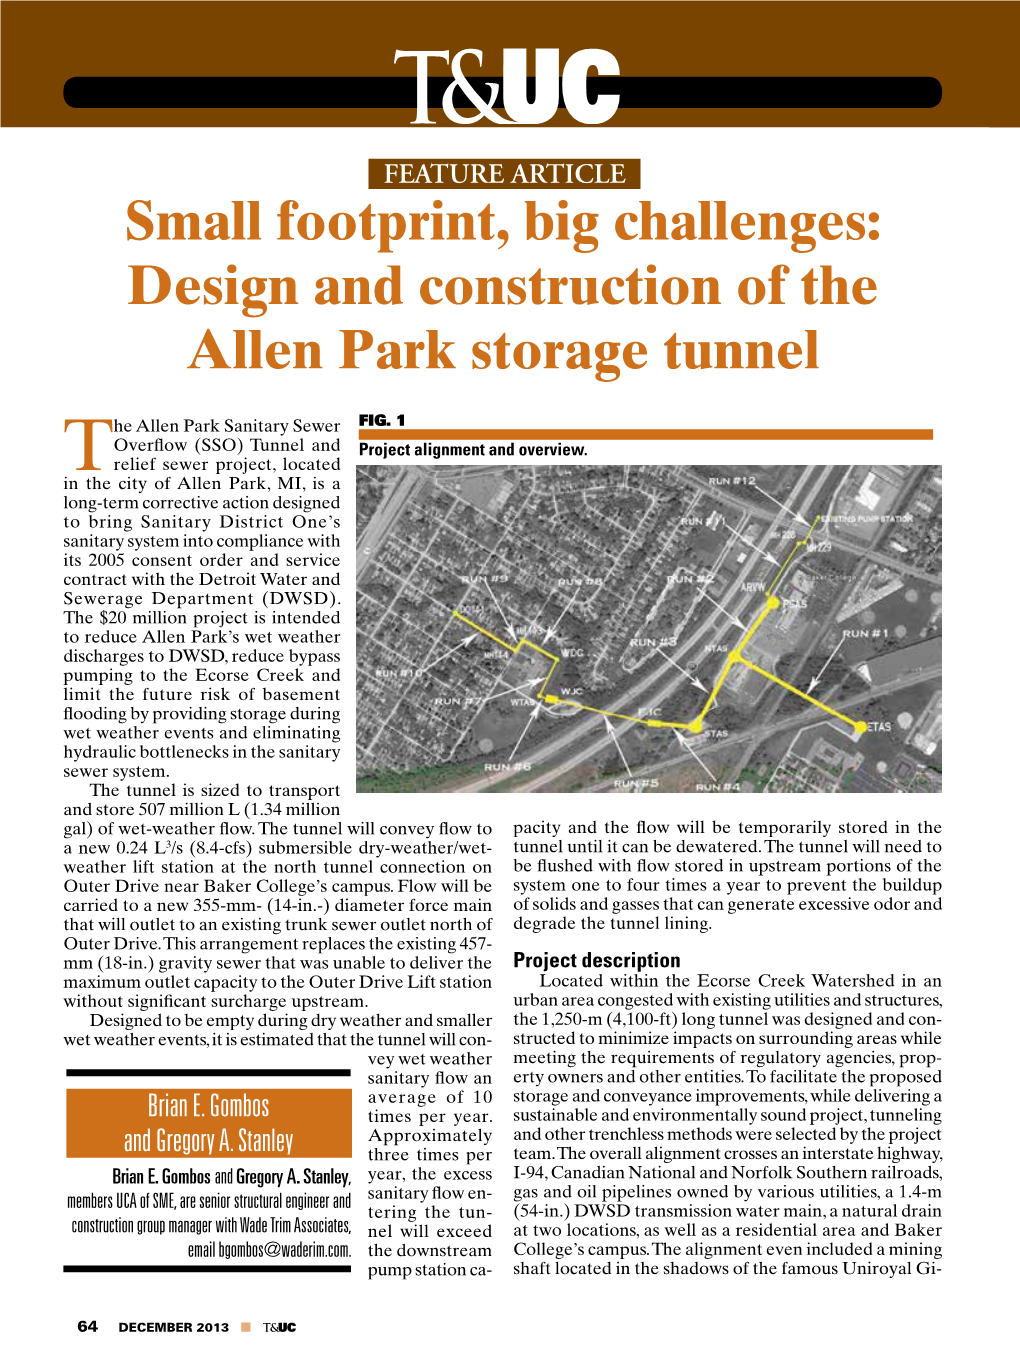 Design and Construction of the Allen Park Storage Tunnel